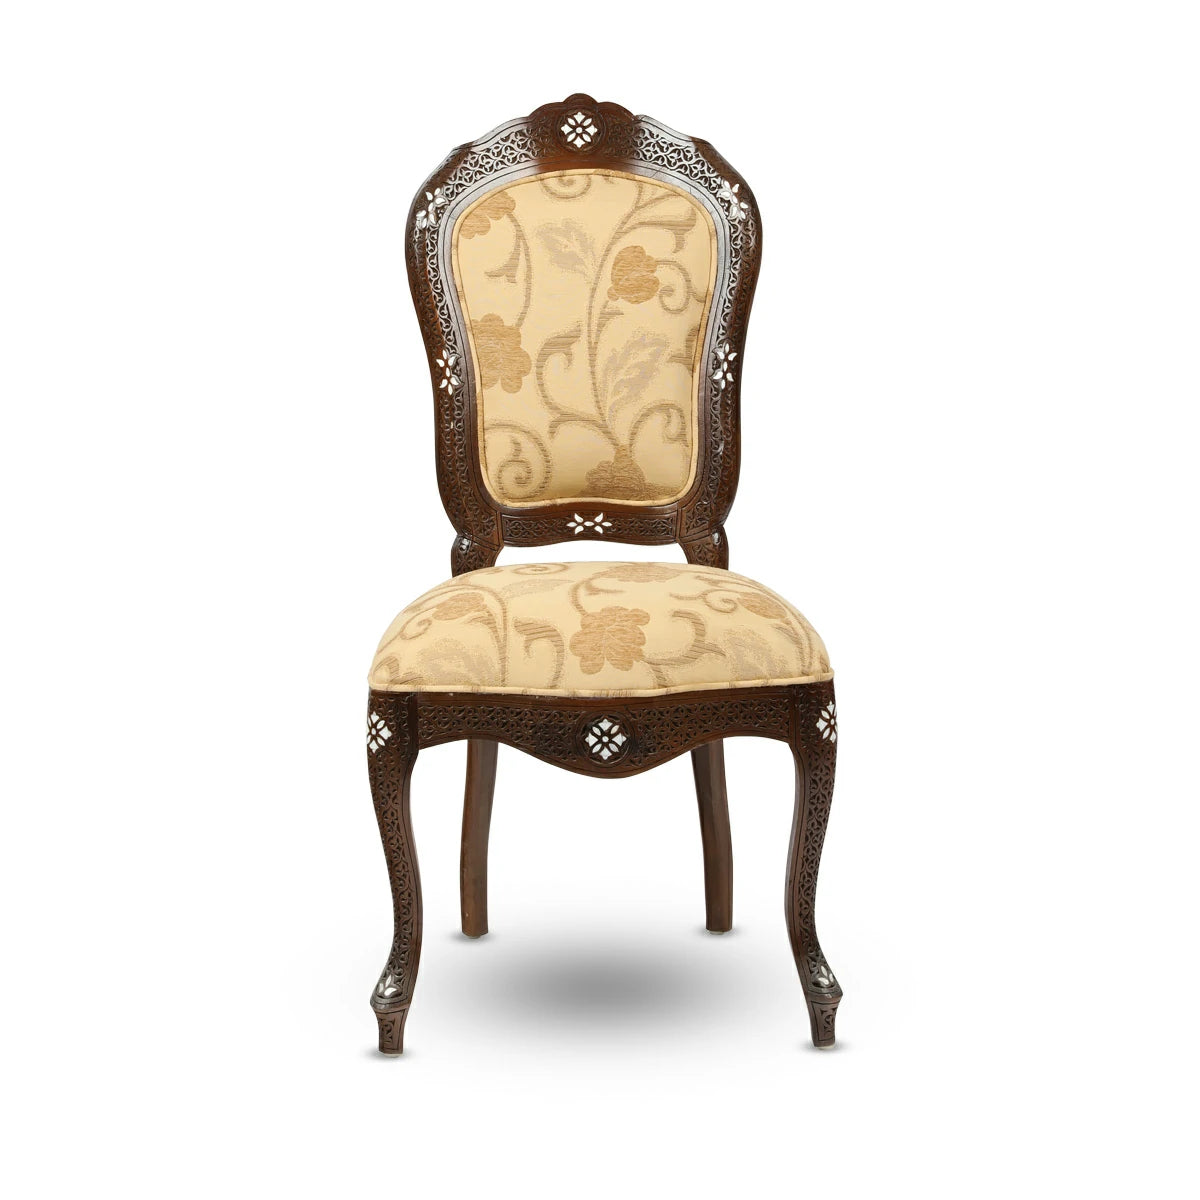 Traditional Syrian Short Back Side Chair with ethnic carvings and inlays